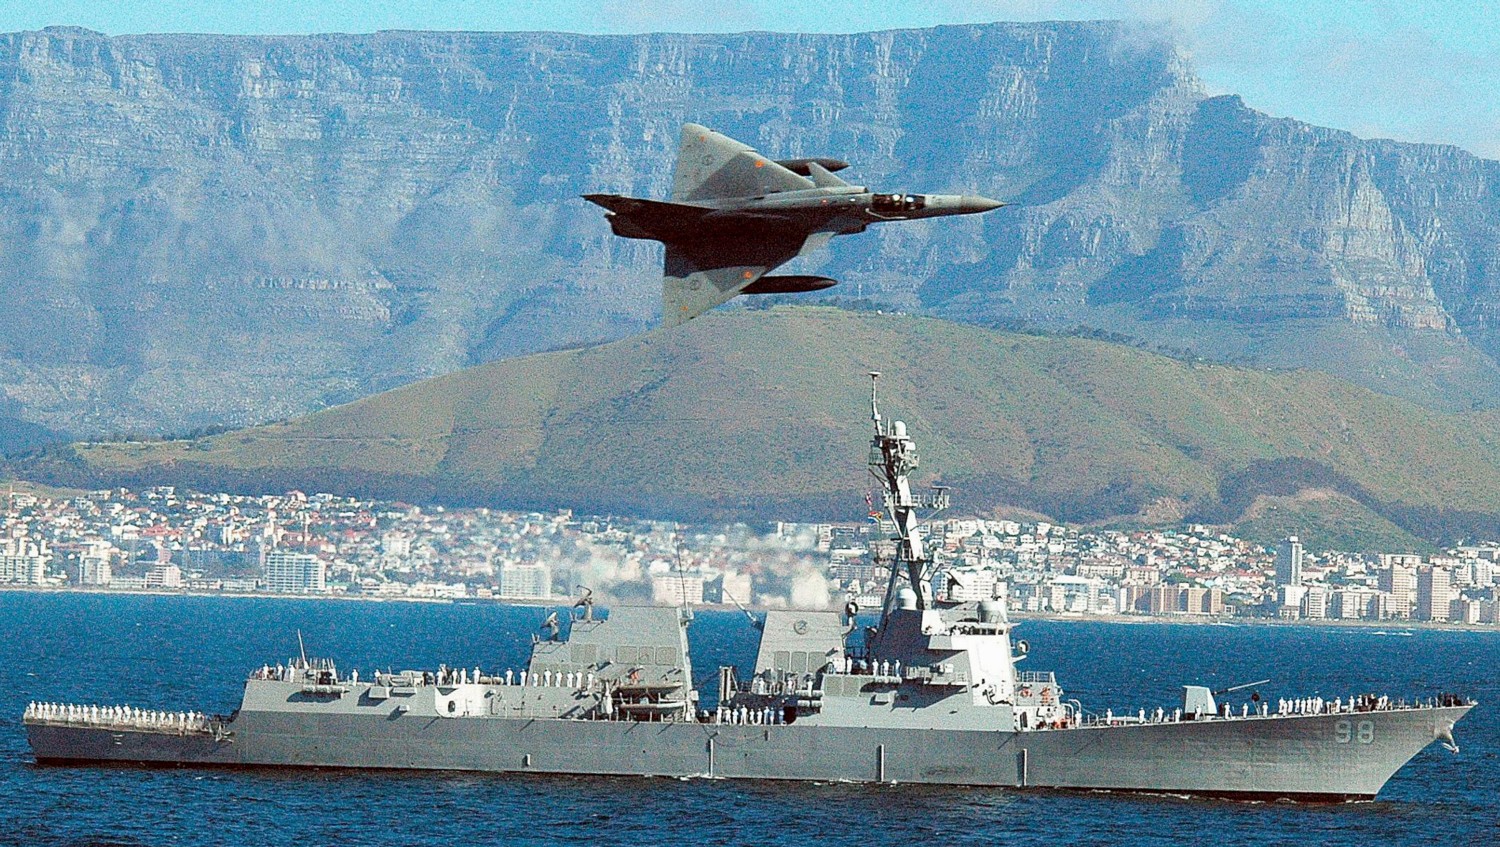 ddg-98 uss forrest sherman arleigh burke class guided missile destroyer aegis us navy cape town south africa 12